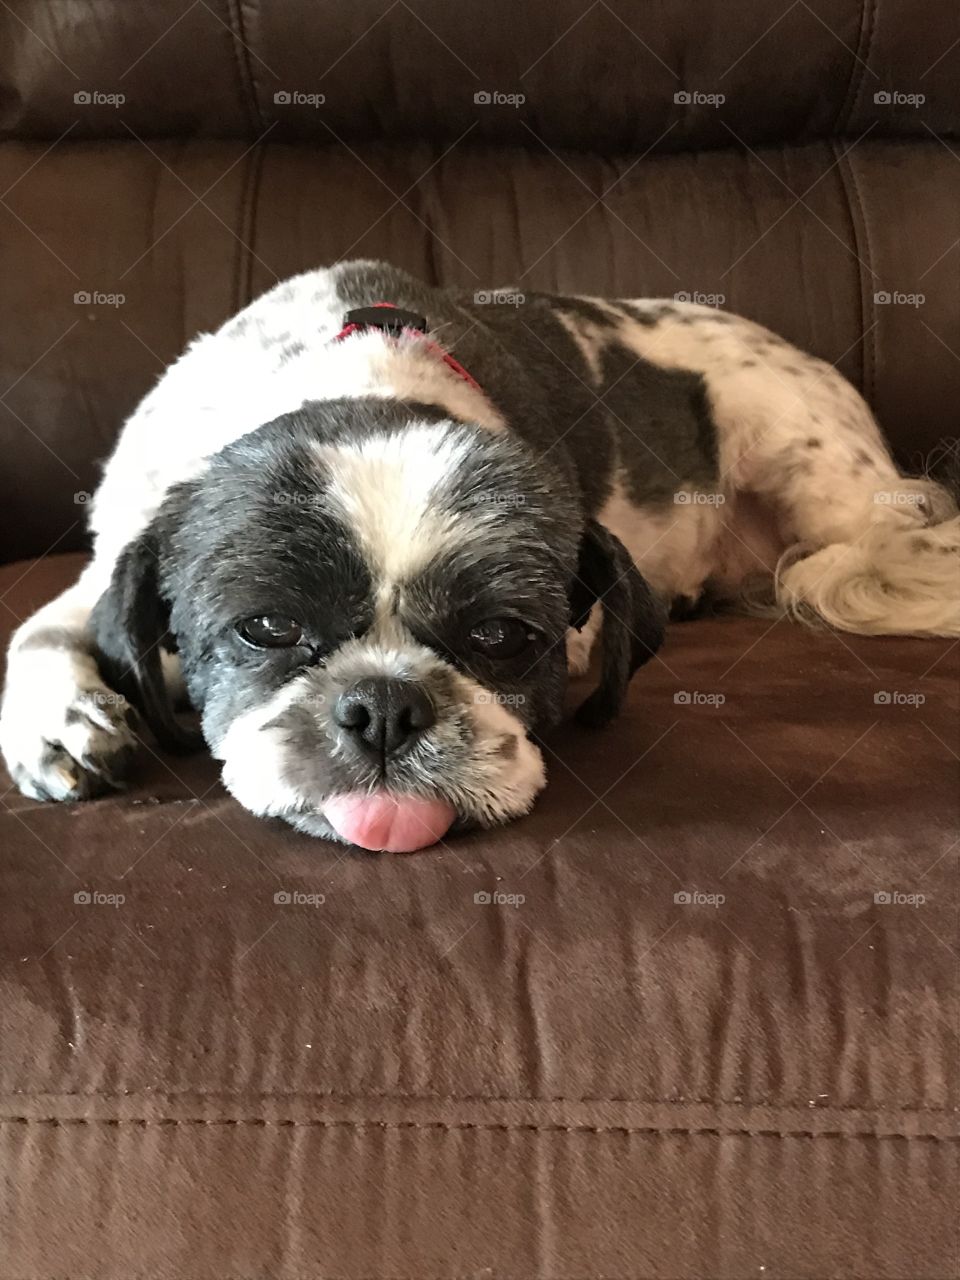 Sweet old dog relaxing on a hot summer afternoon